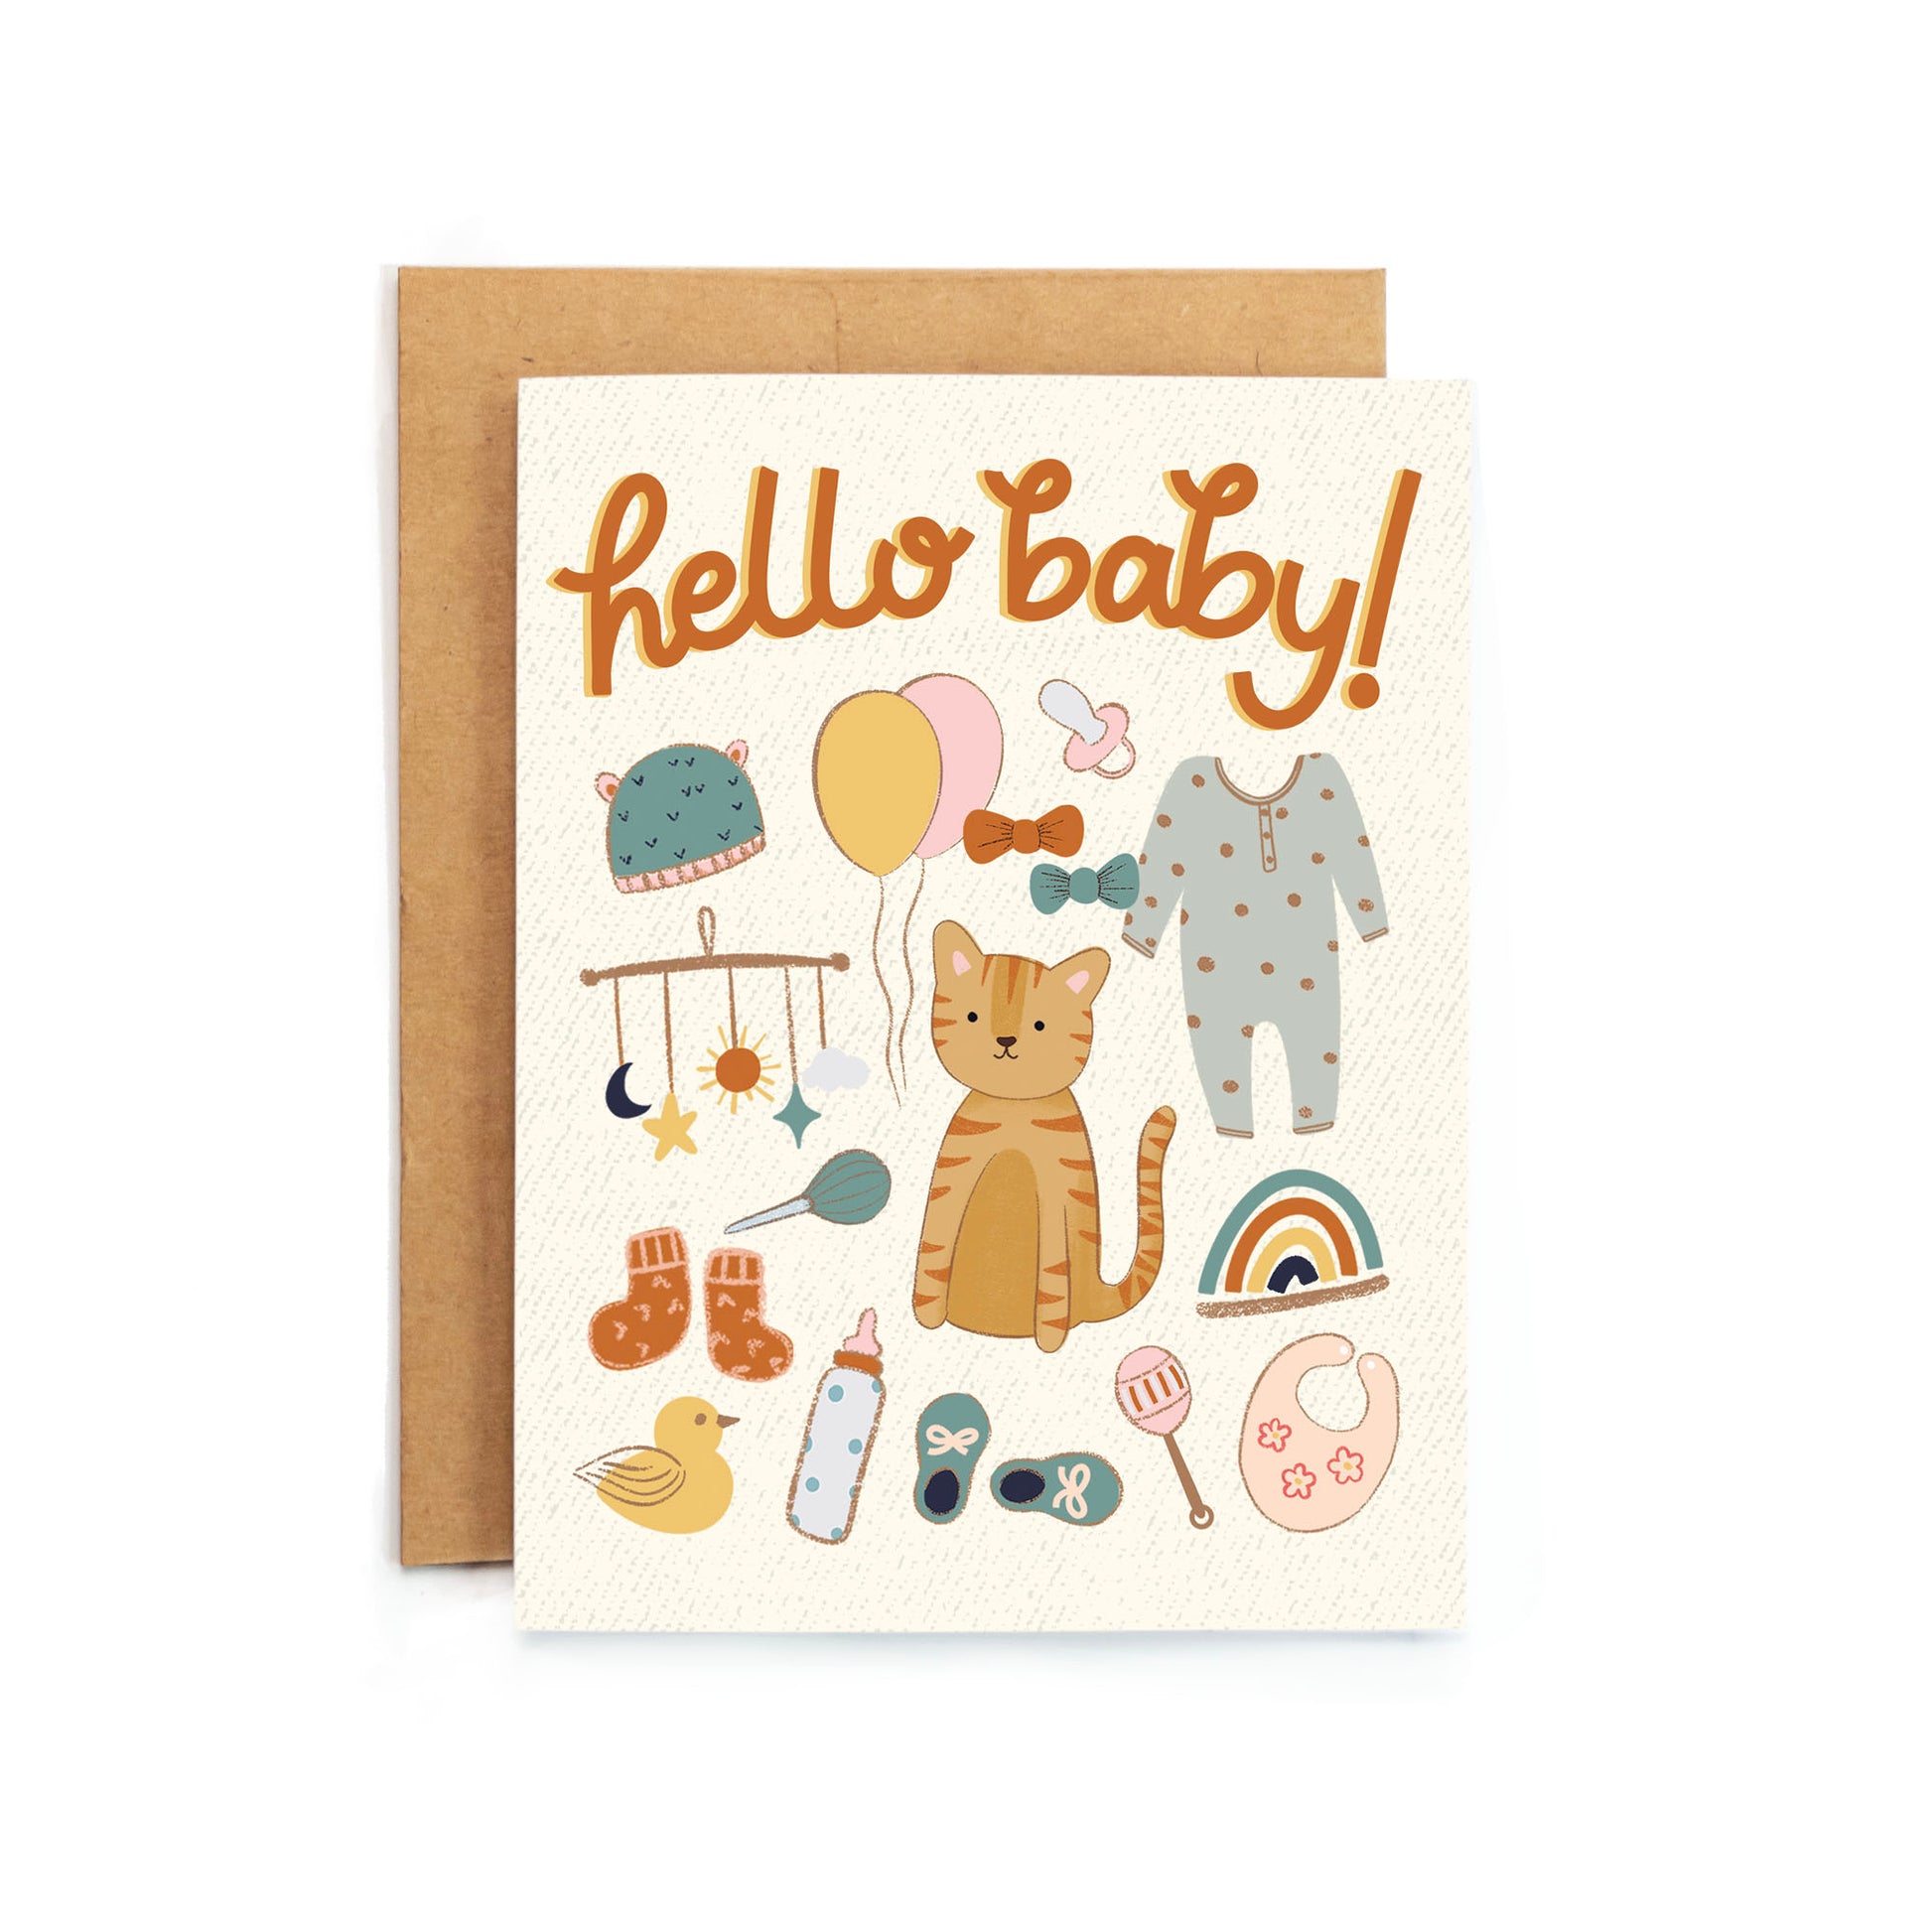 a card with a cat and baby items on it